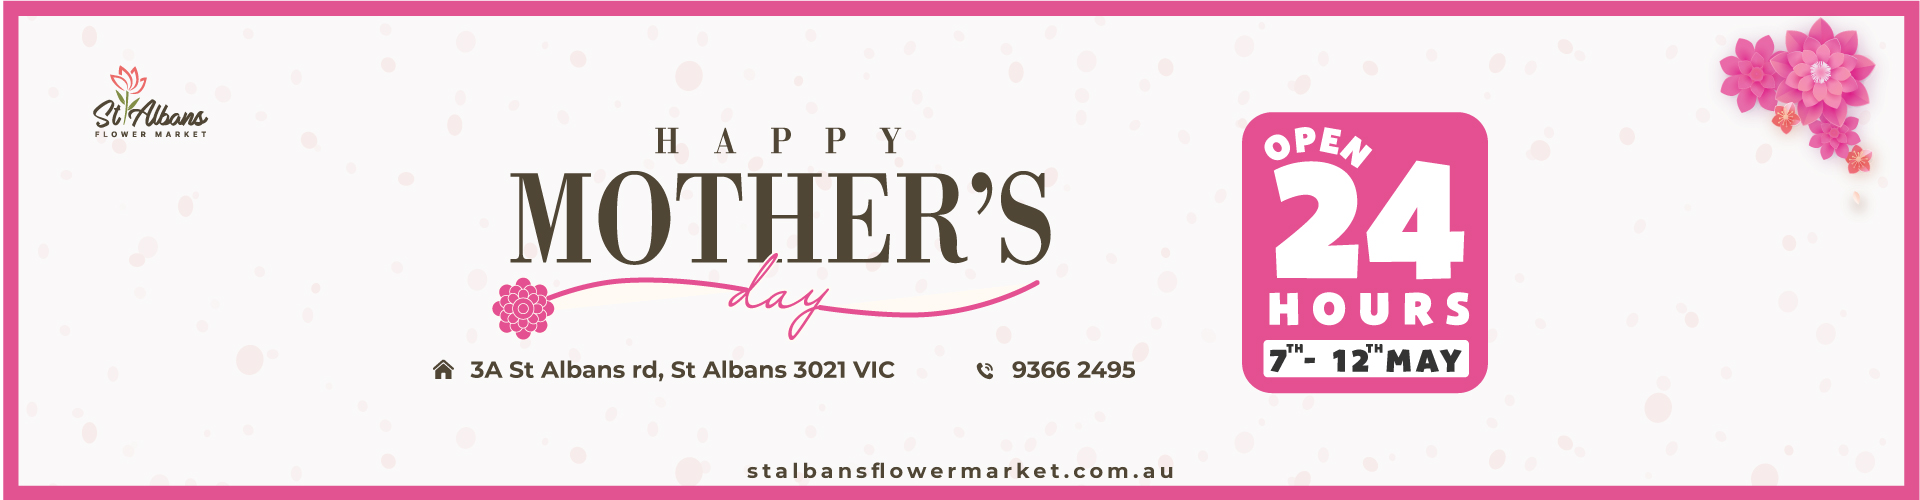 Happy Mother's Day Special Event at St Albans Flower Market